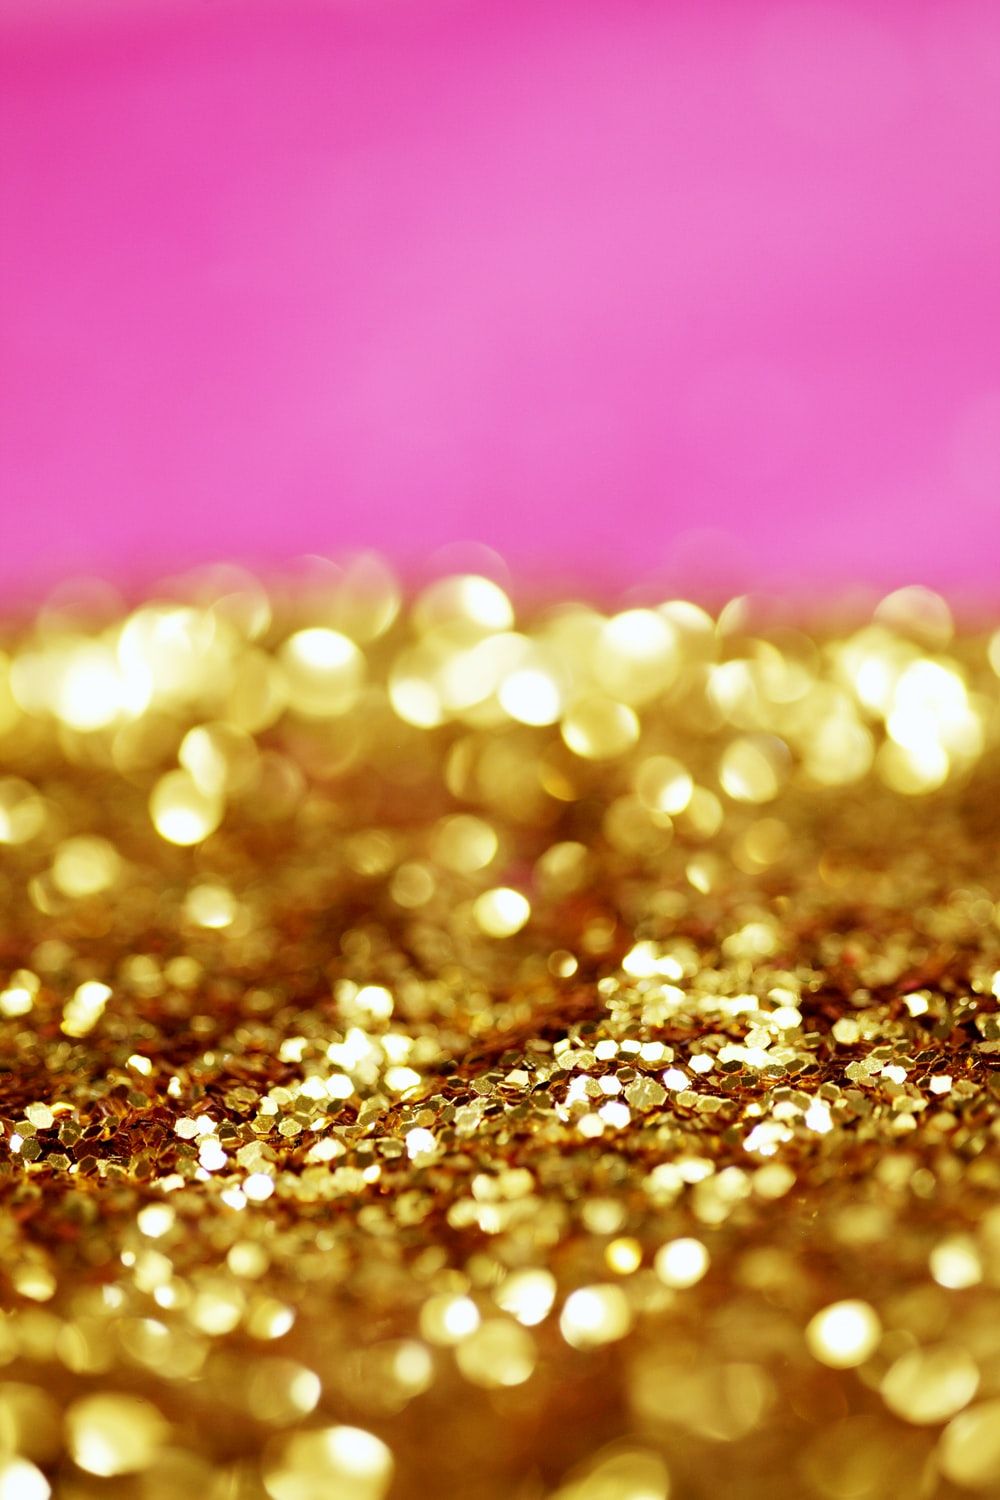 Glitter Picture. Download Free Image